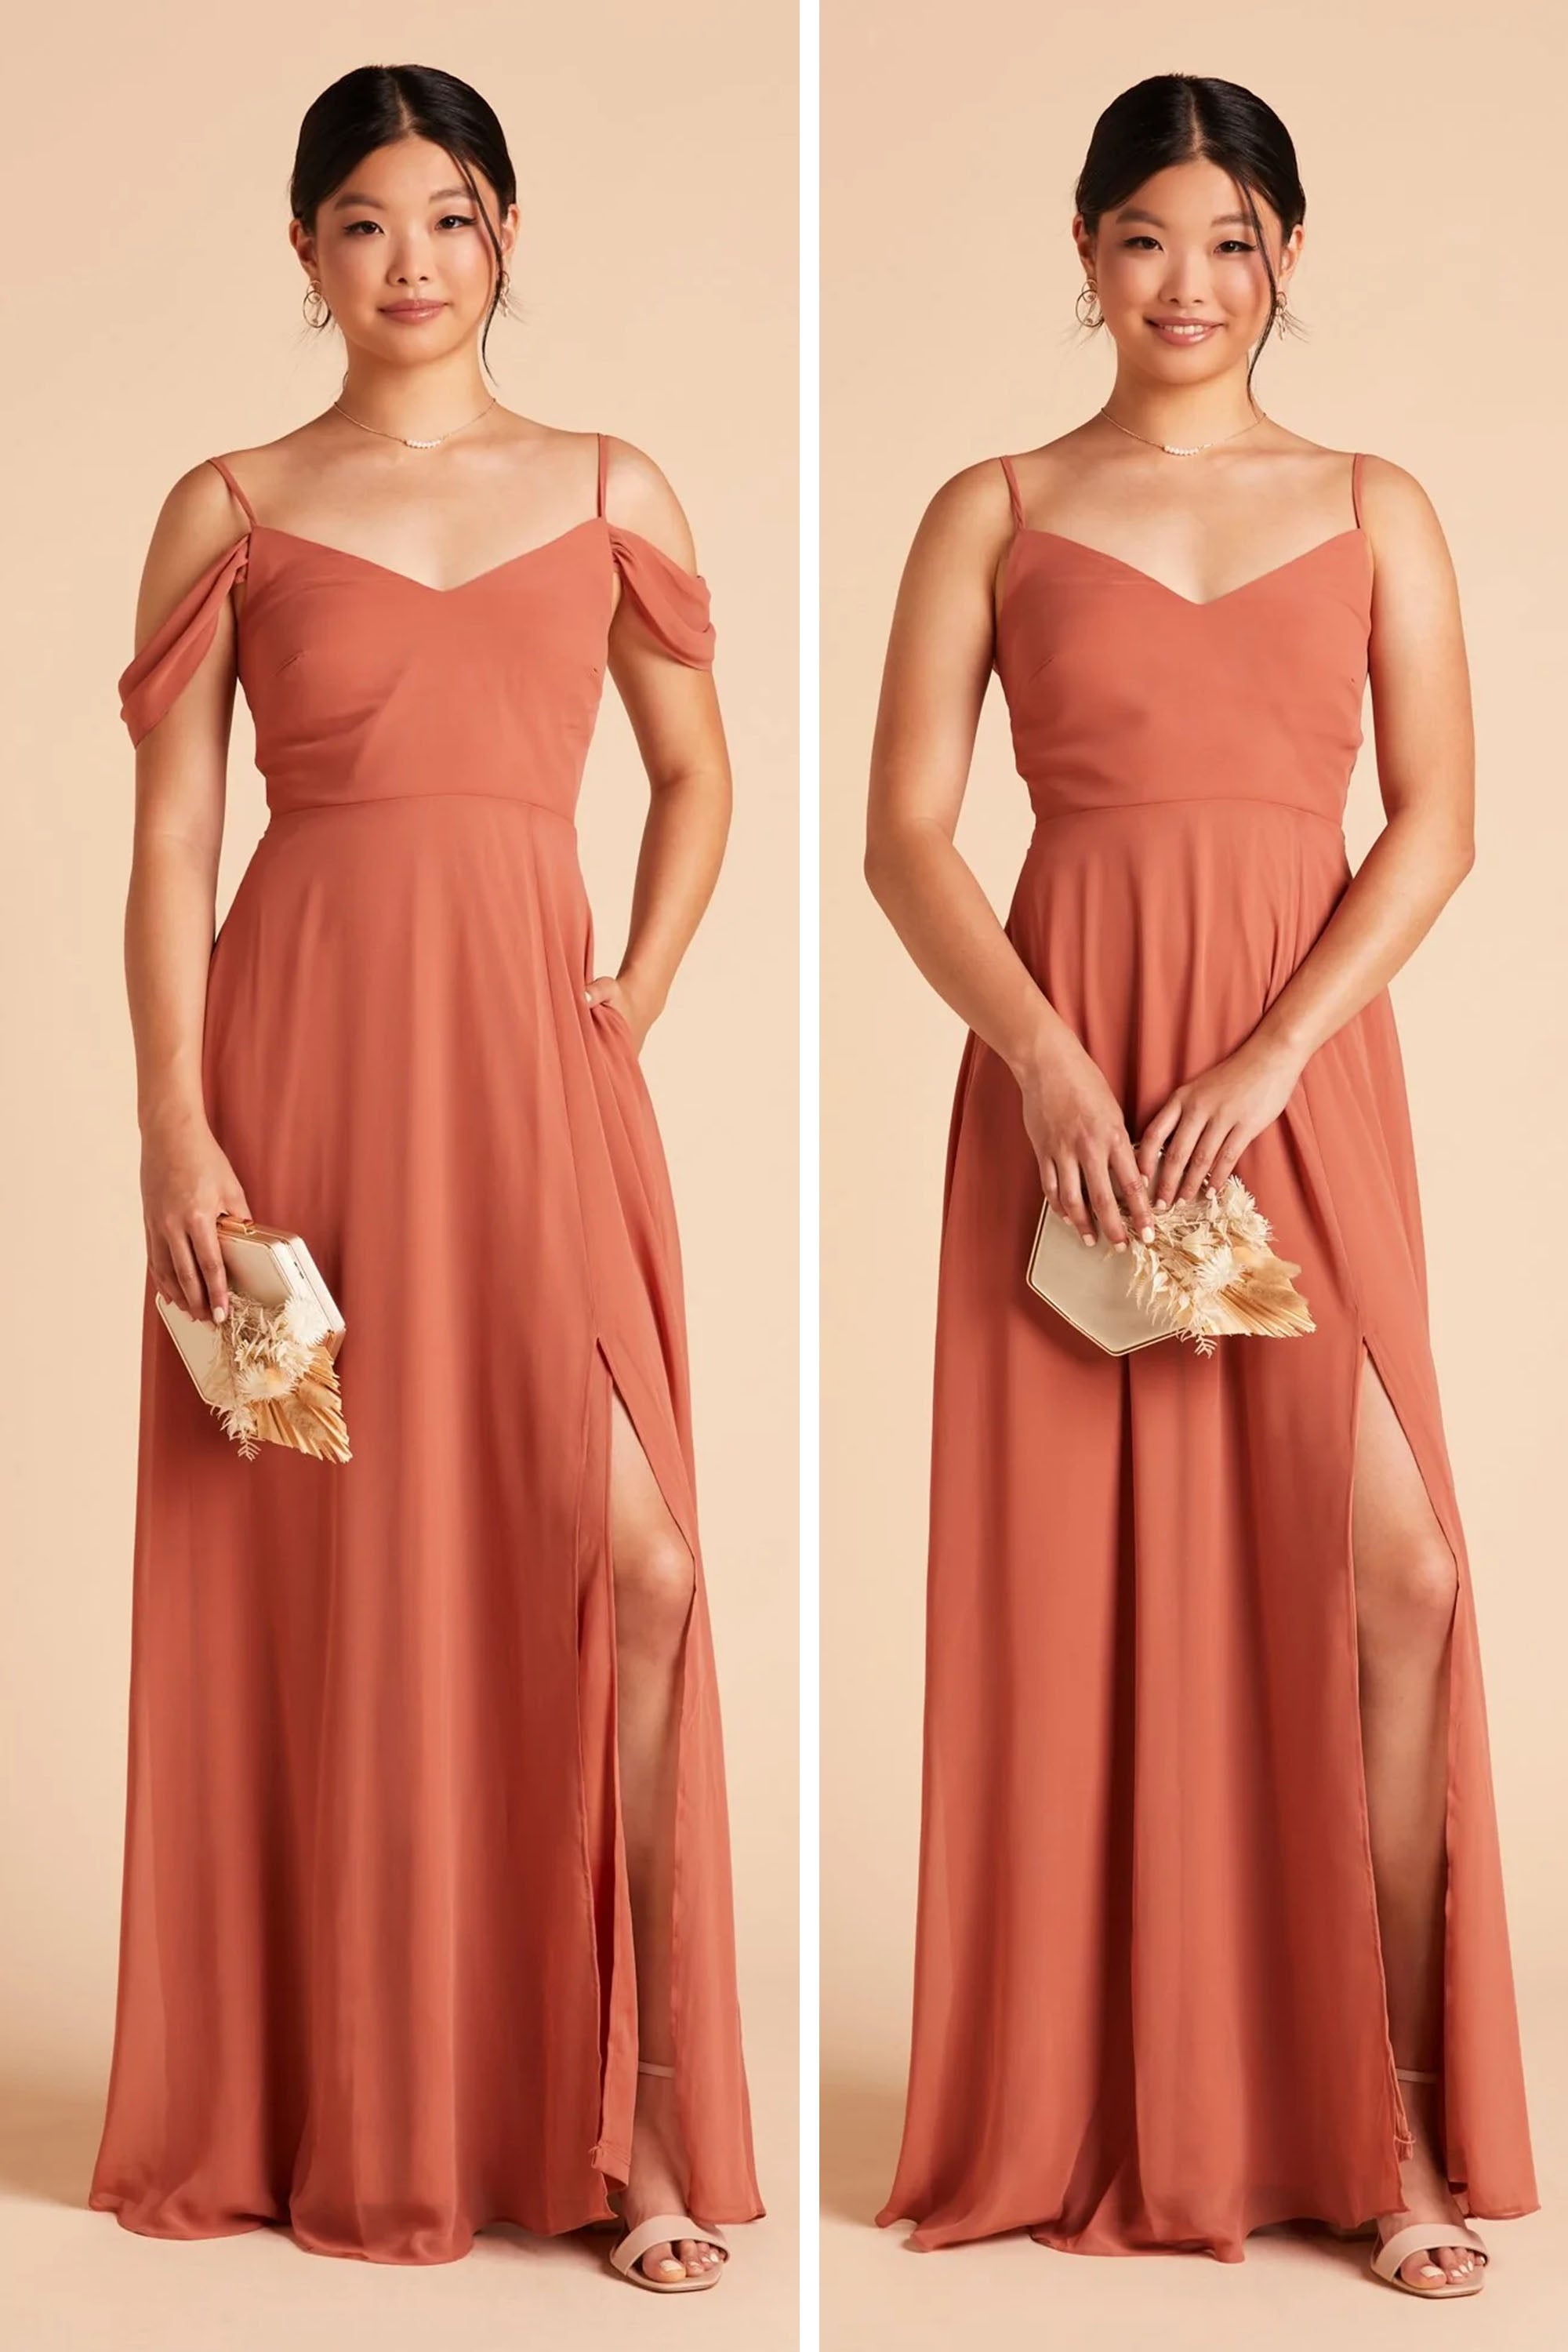 Side-by-side front views of two variations of the Devin Convertible Bridesmaid Dress in terracotta chiffon. On the left, the model wears the optional sleeves that drape over her upper arms. On the right, the model wears the dress without the draping sleeves, featuring simple spaghetti straps.